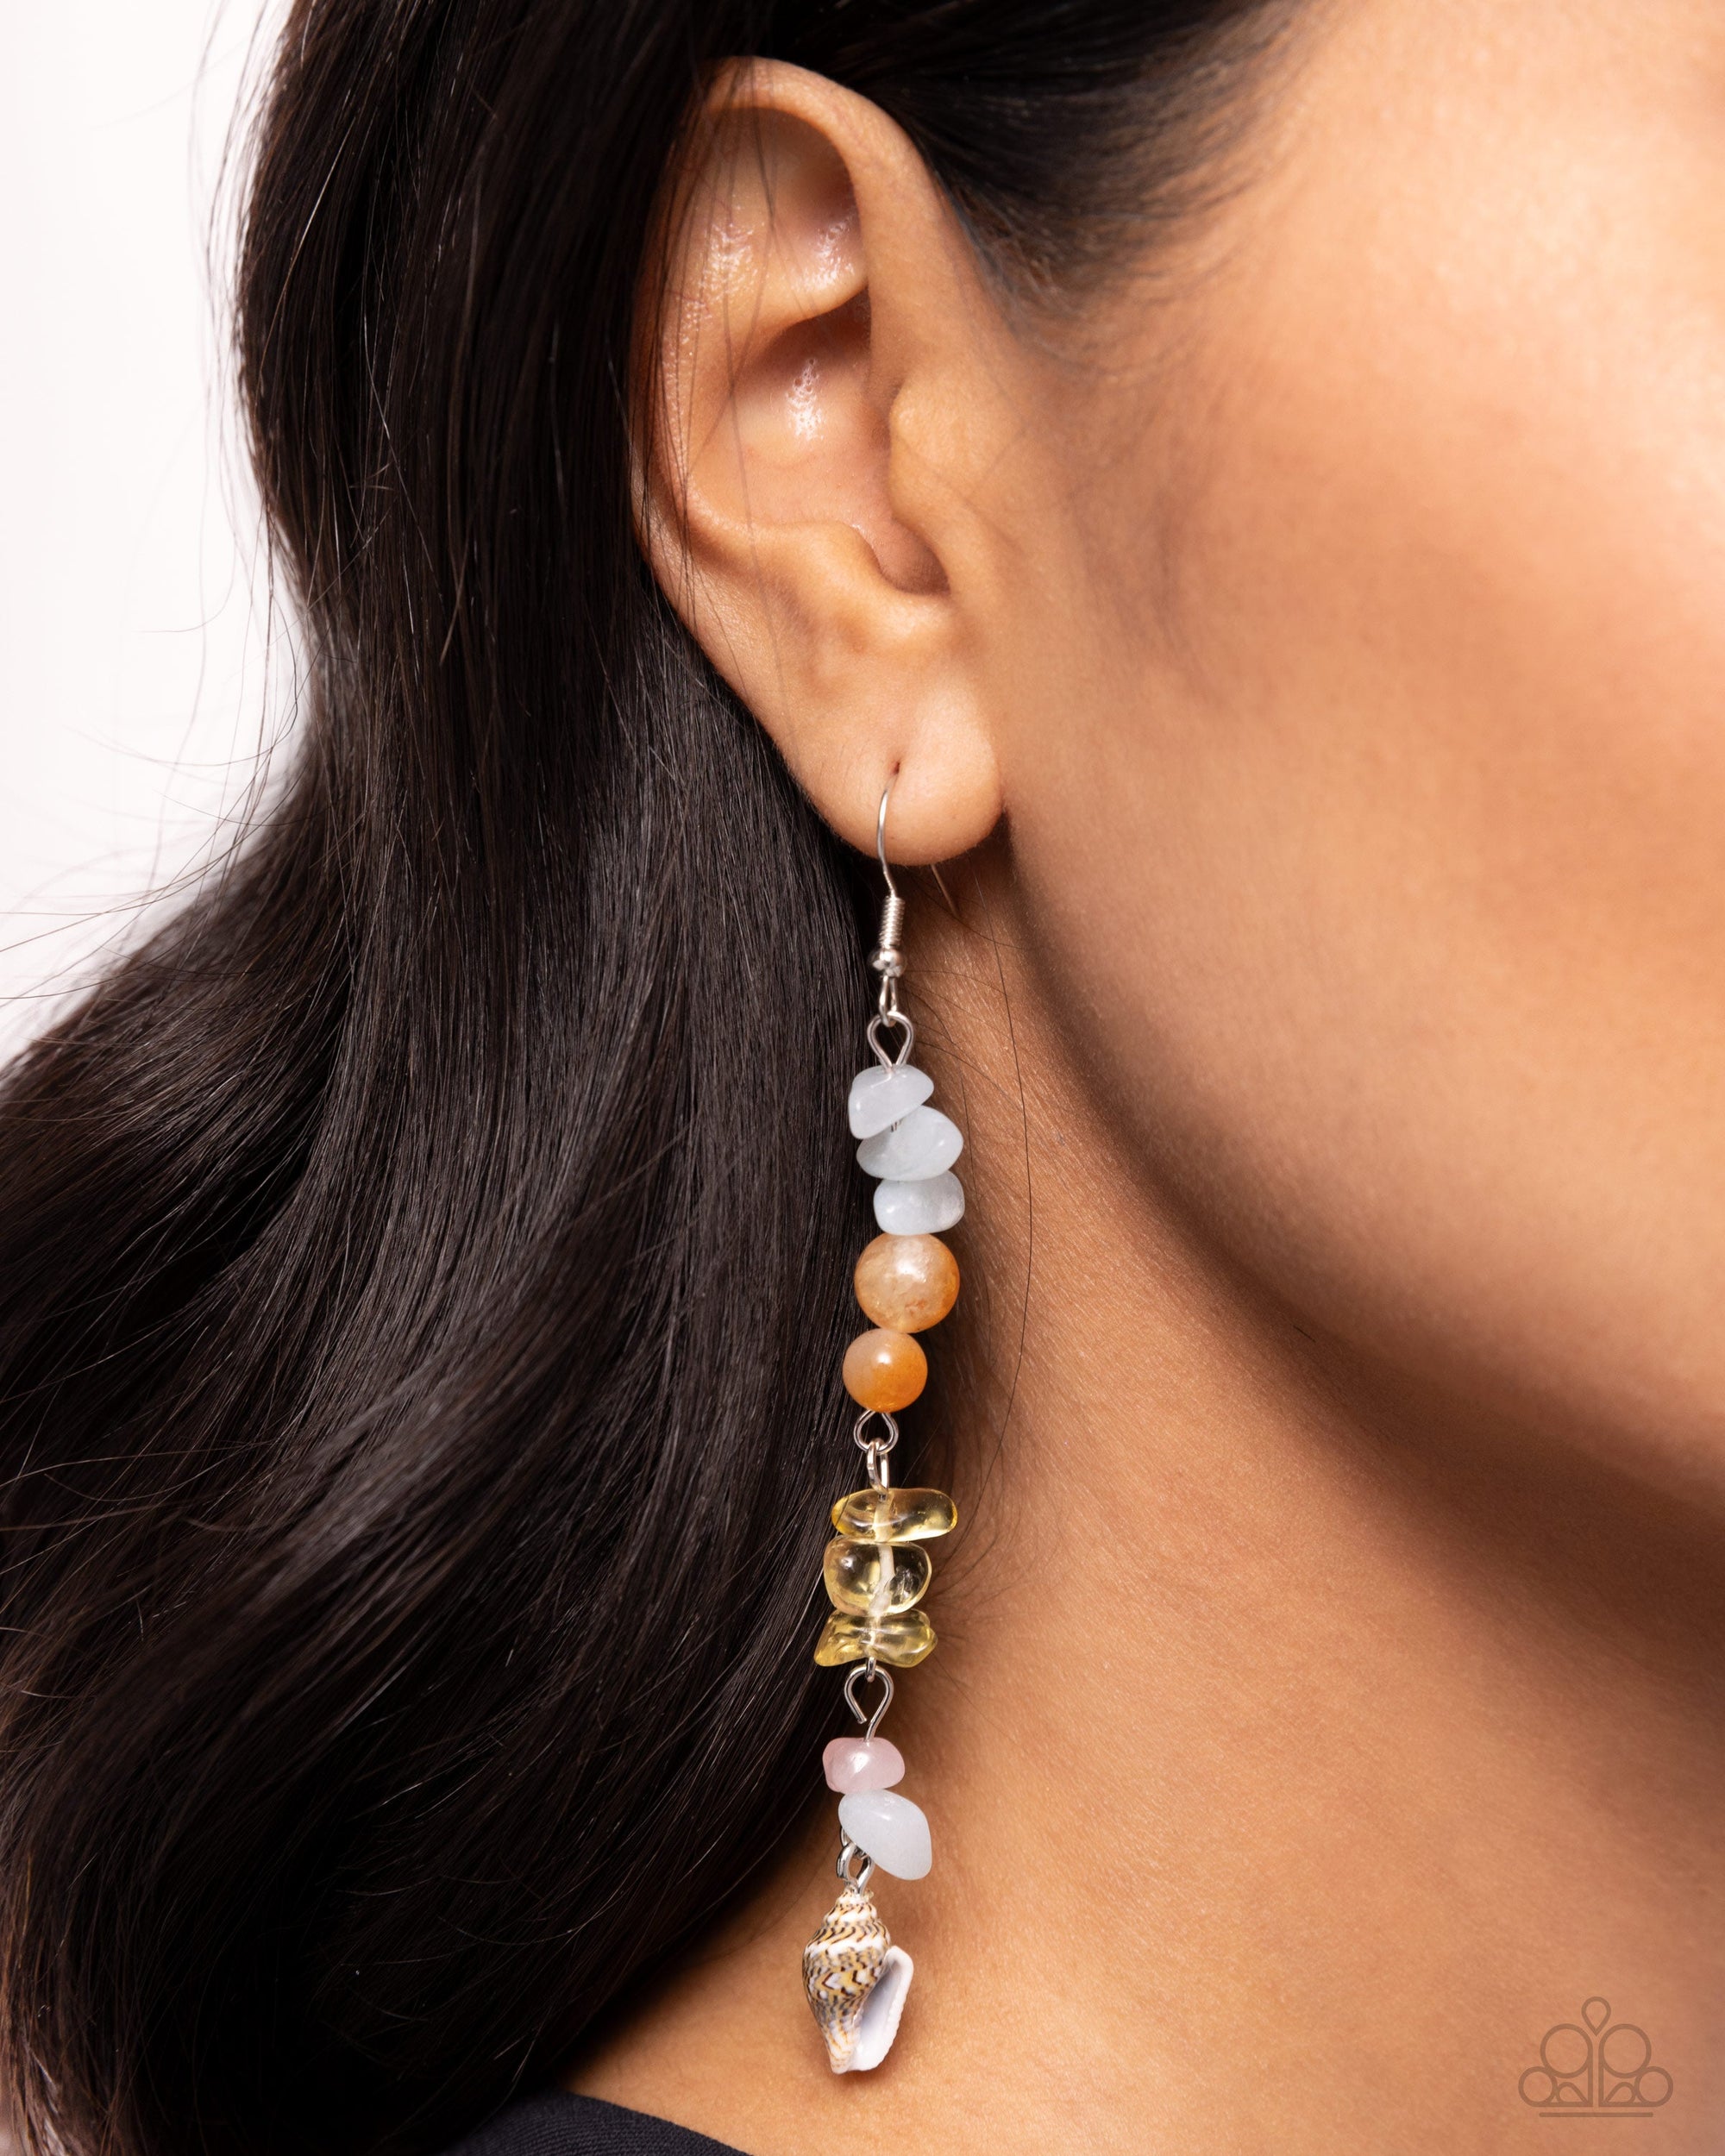 Game of STONES Multi Stone & Seashell Earrings - Paparazzi Accessories- lightbox - CarasShop.com - $5 Jewelry by Cara Jewels